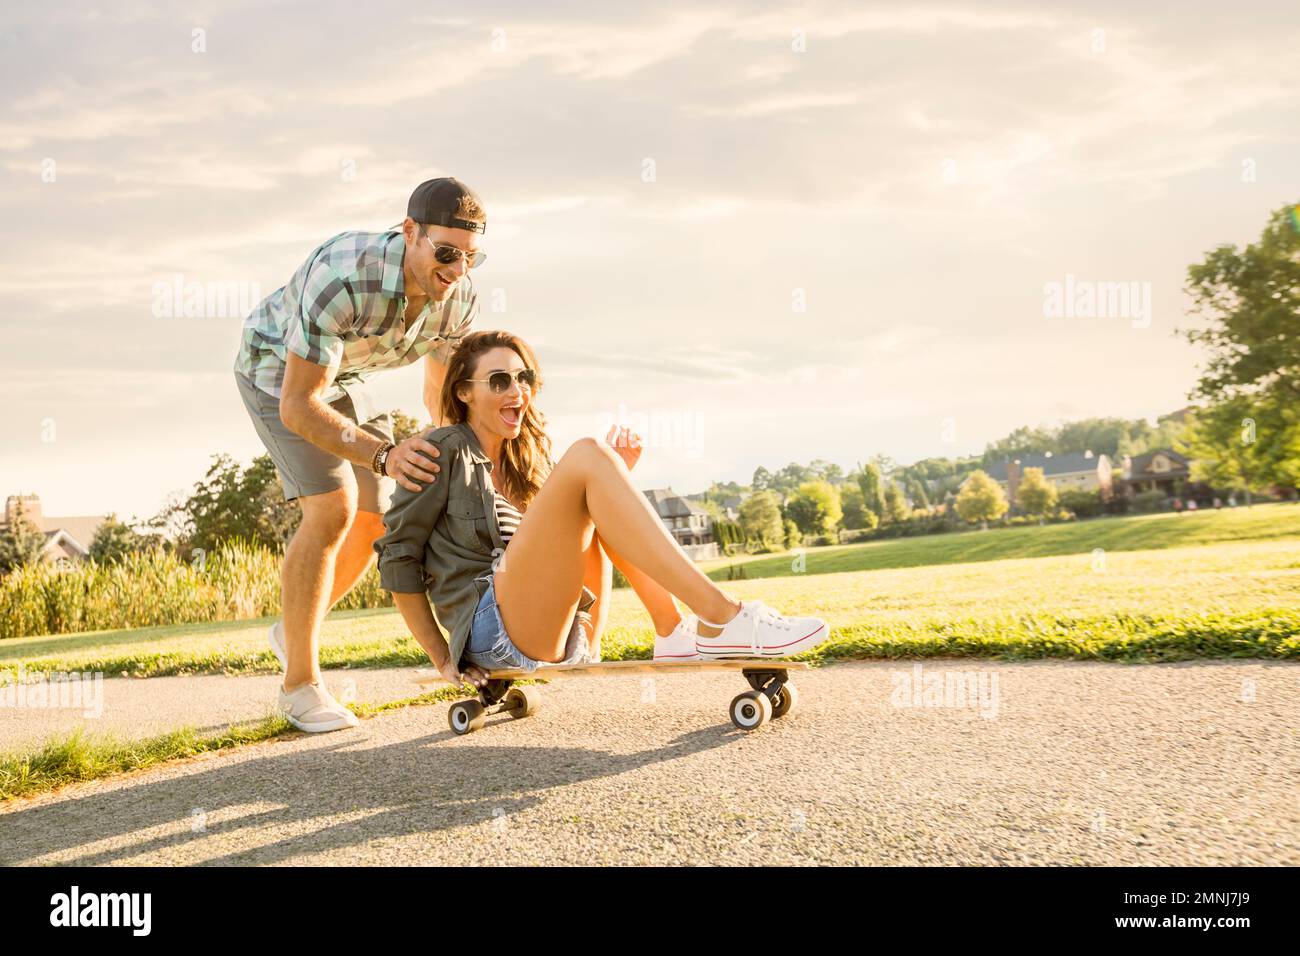 Smiling couple with skateboard in park Stock Photo